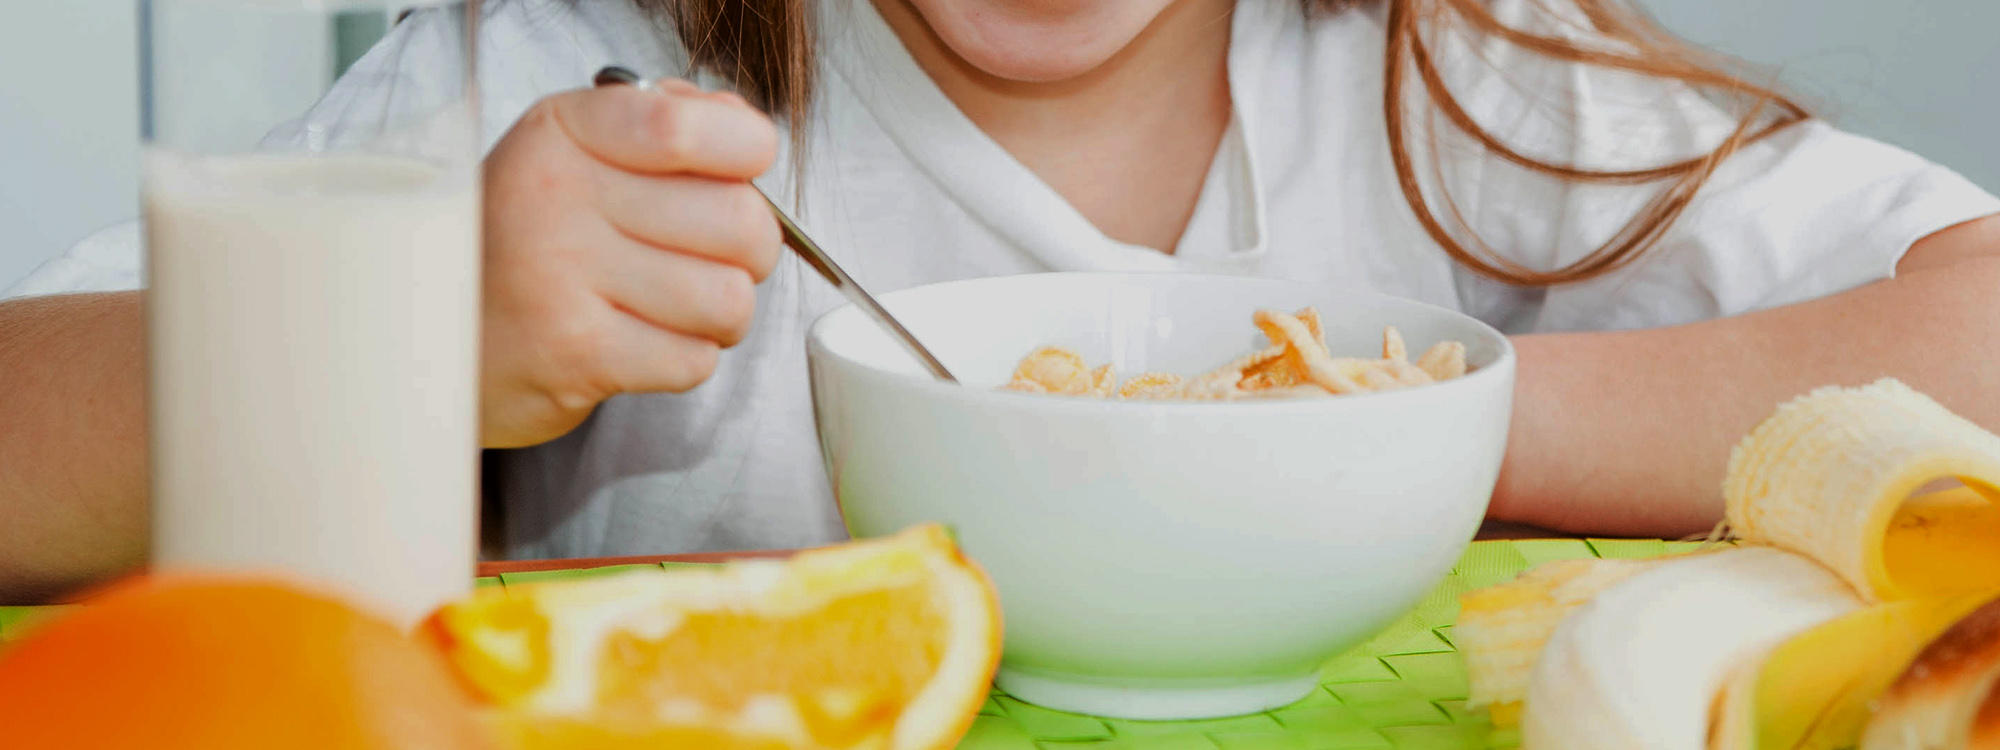 Do Kids Who Eat Breakfast Perform Better Academically? U